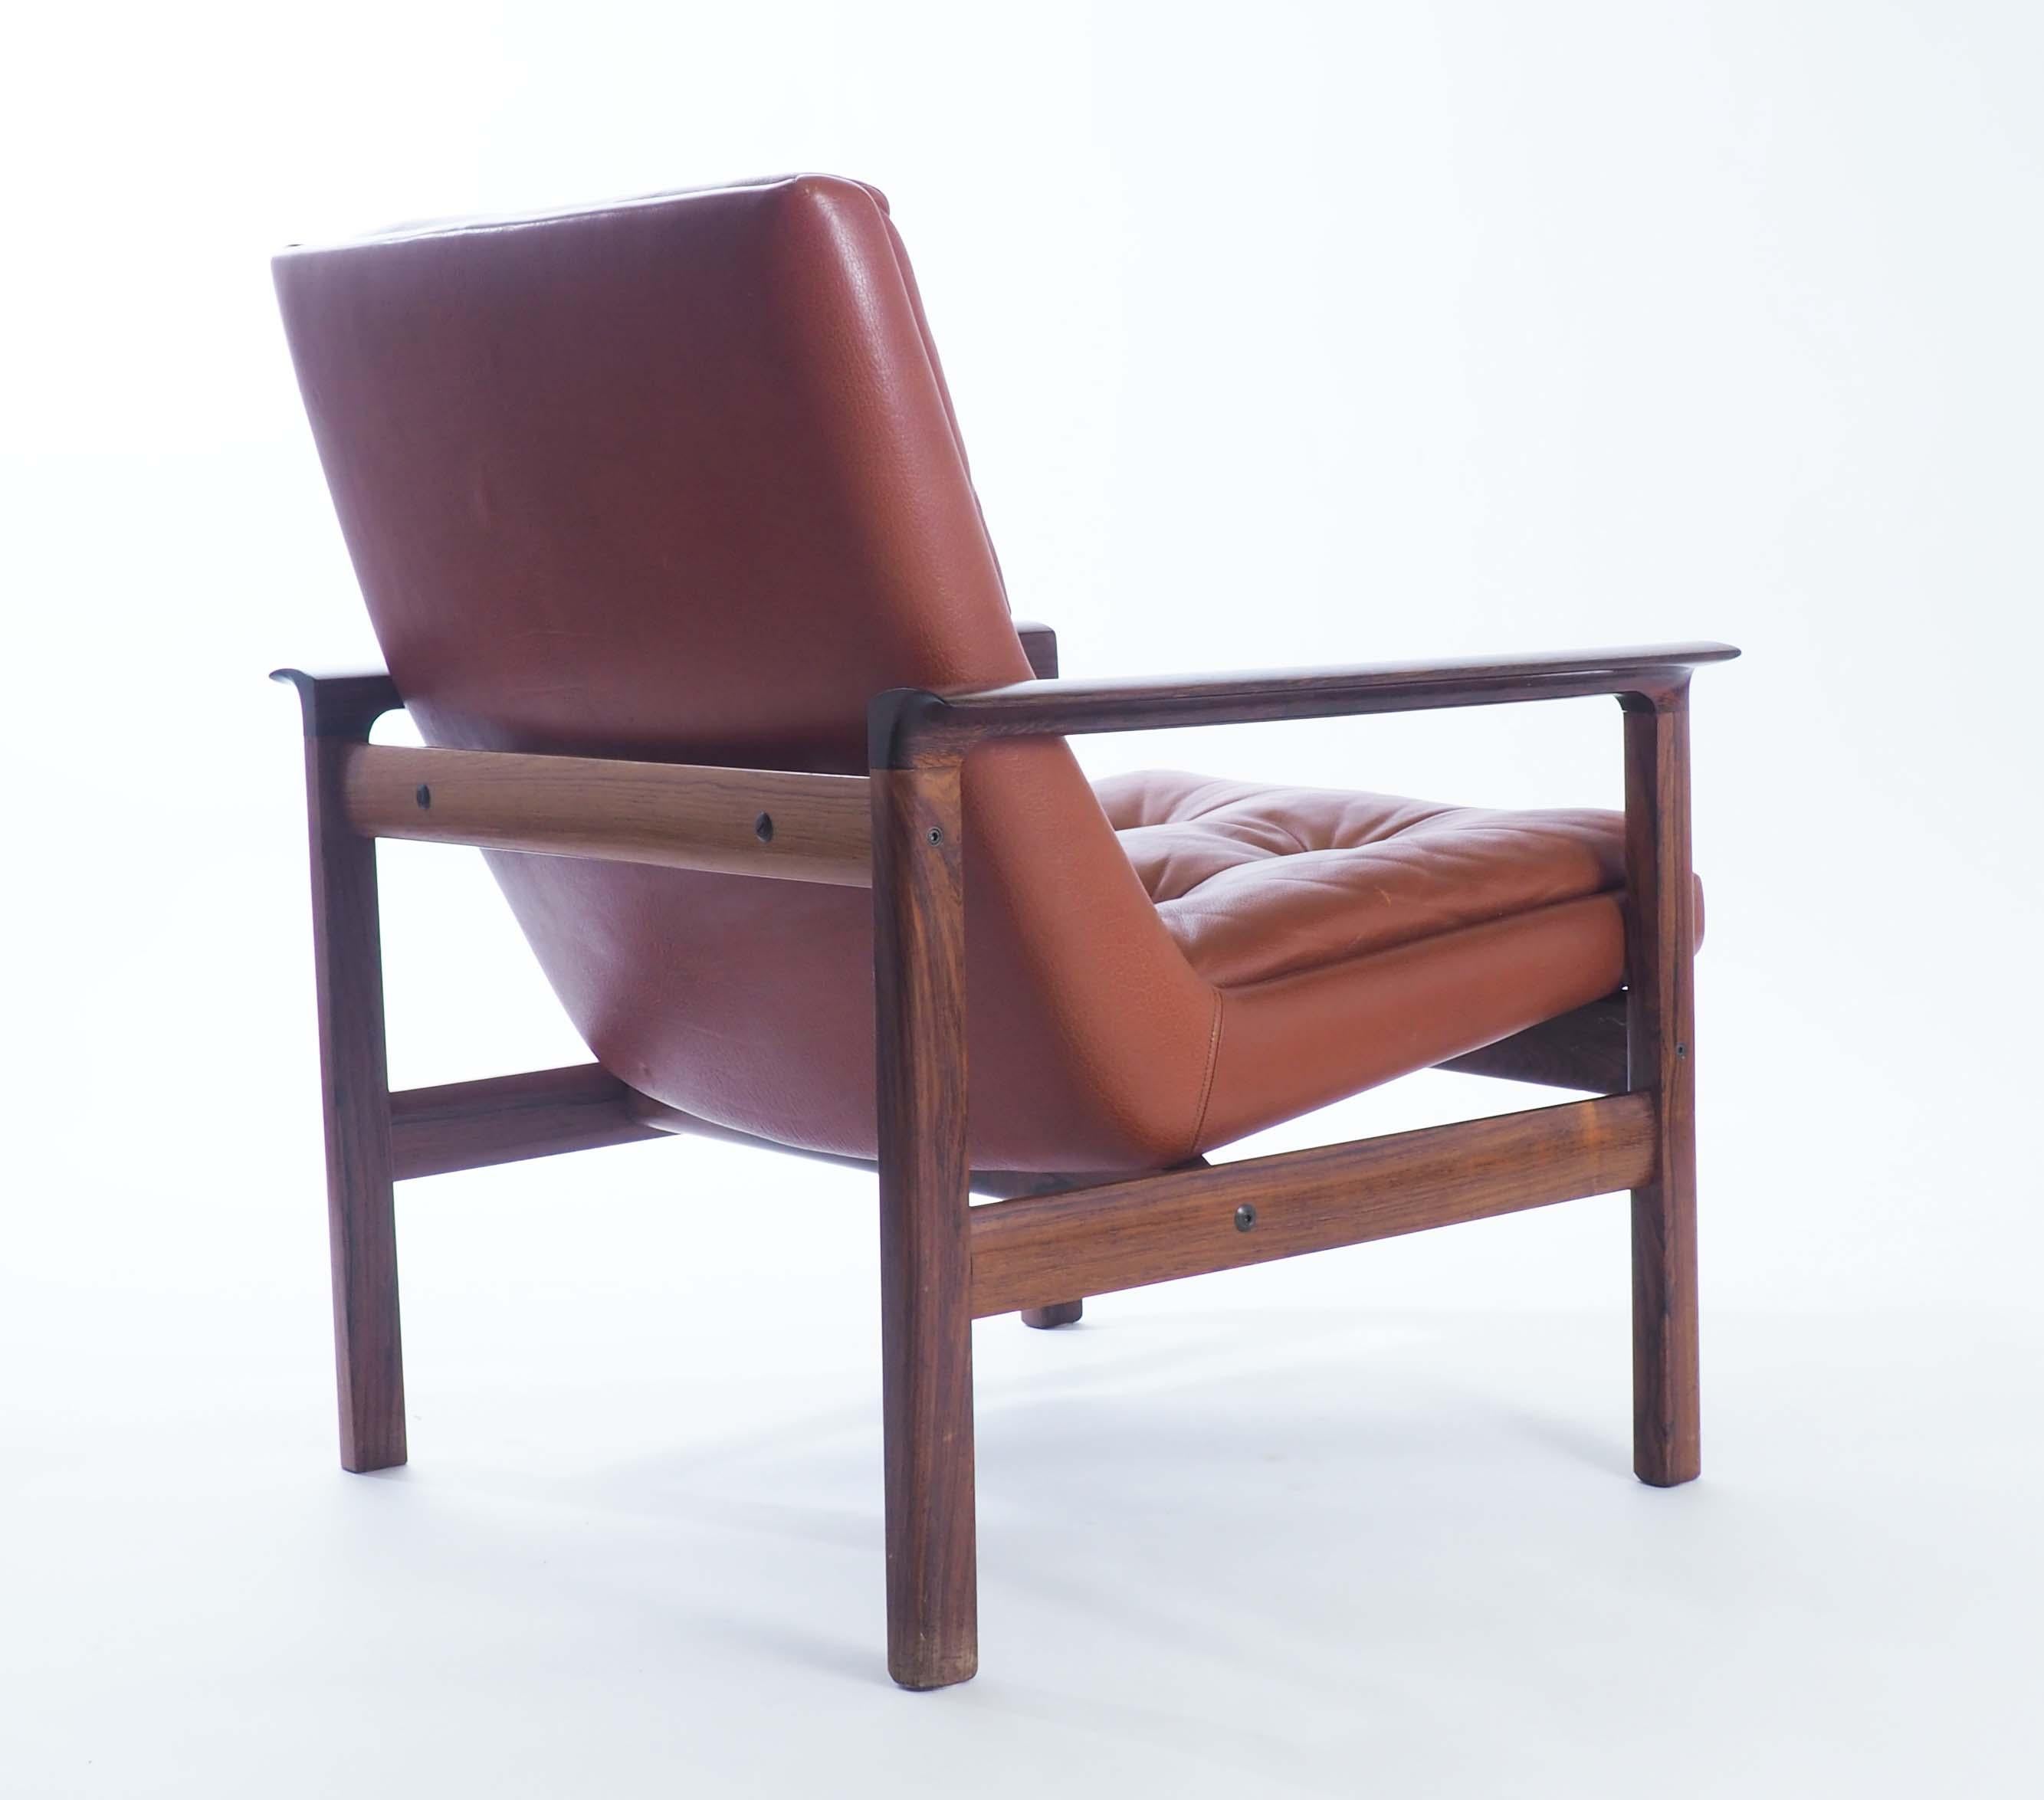 Lounge chair in leather and rosewood by the Norwegian designer Fredrik Kayser. Designed 1965 for Vatne Møbler, Norway.